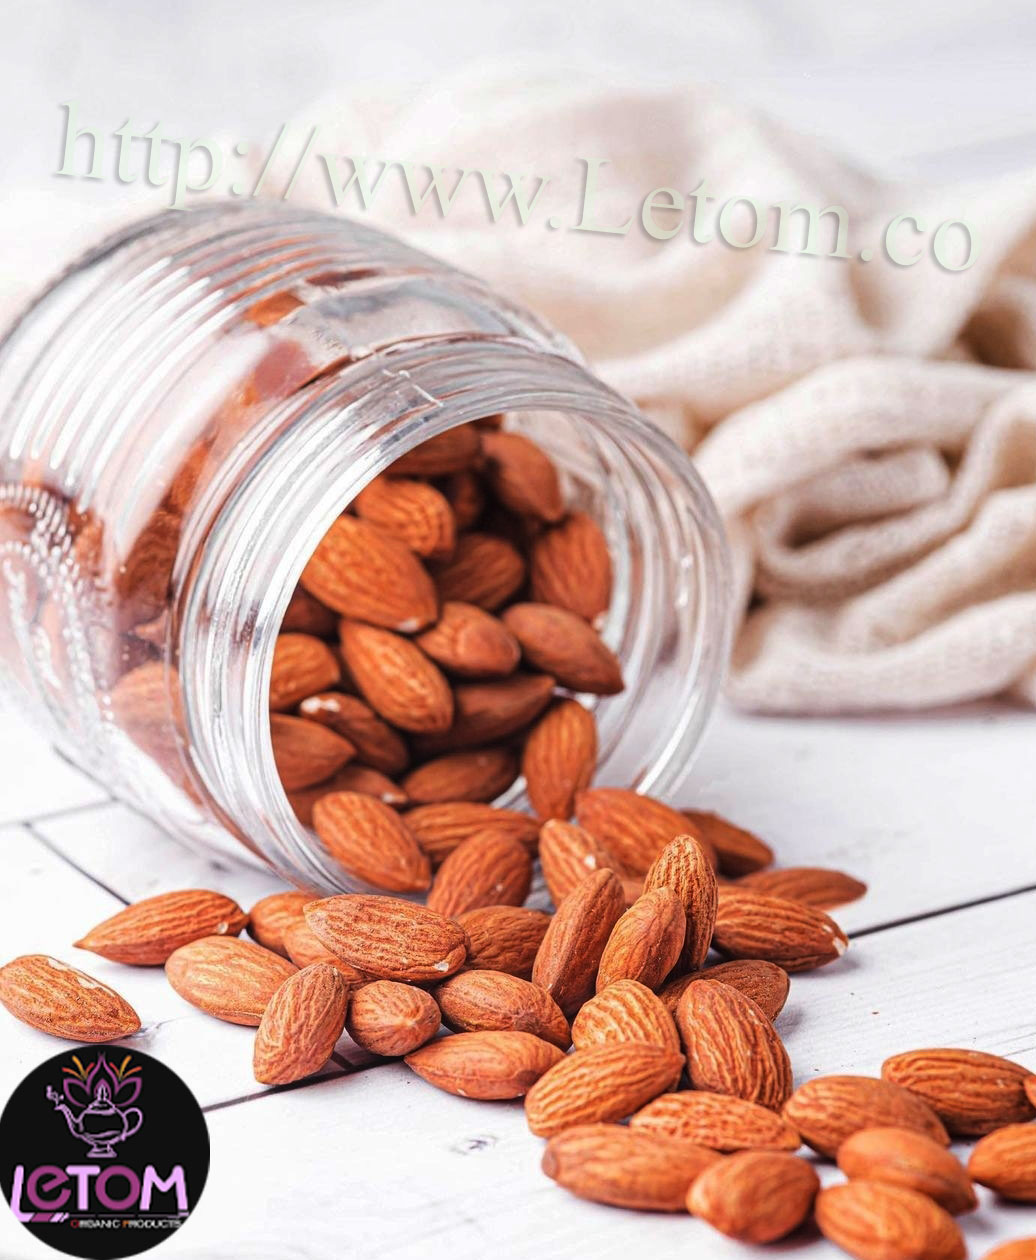 Use natural fat burners such as almonds